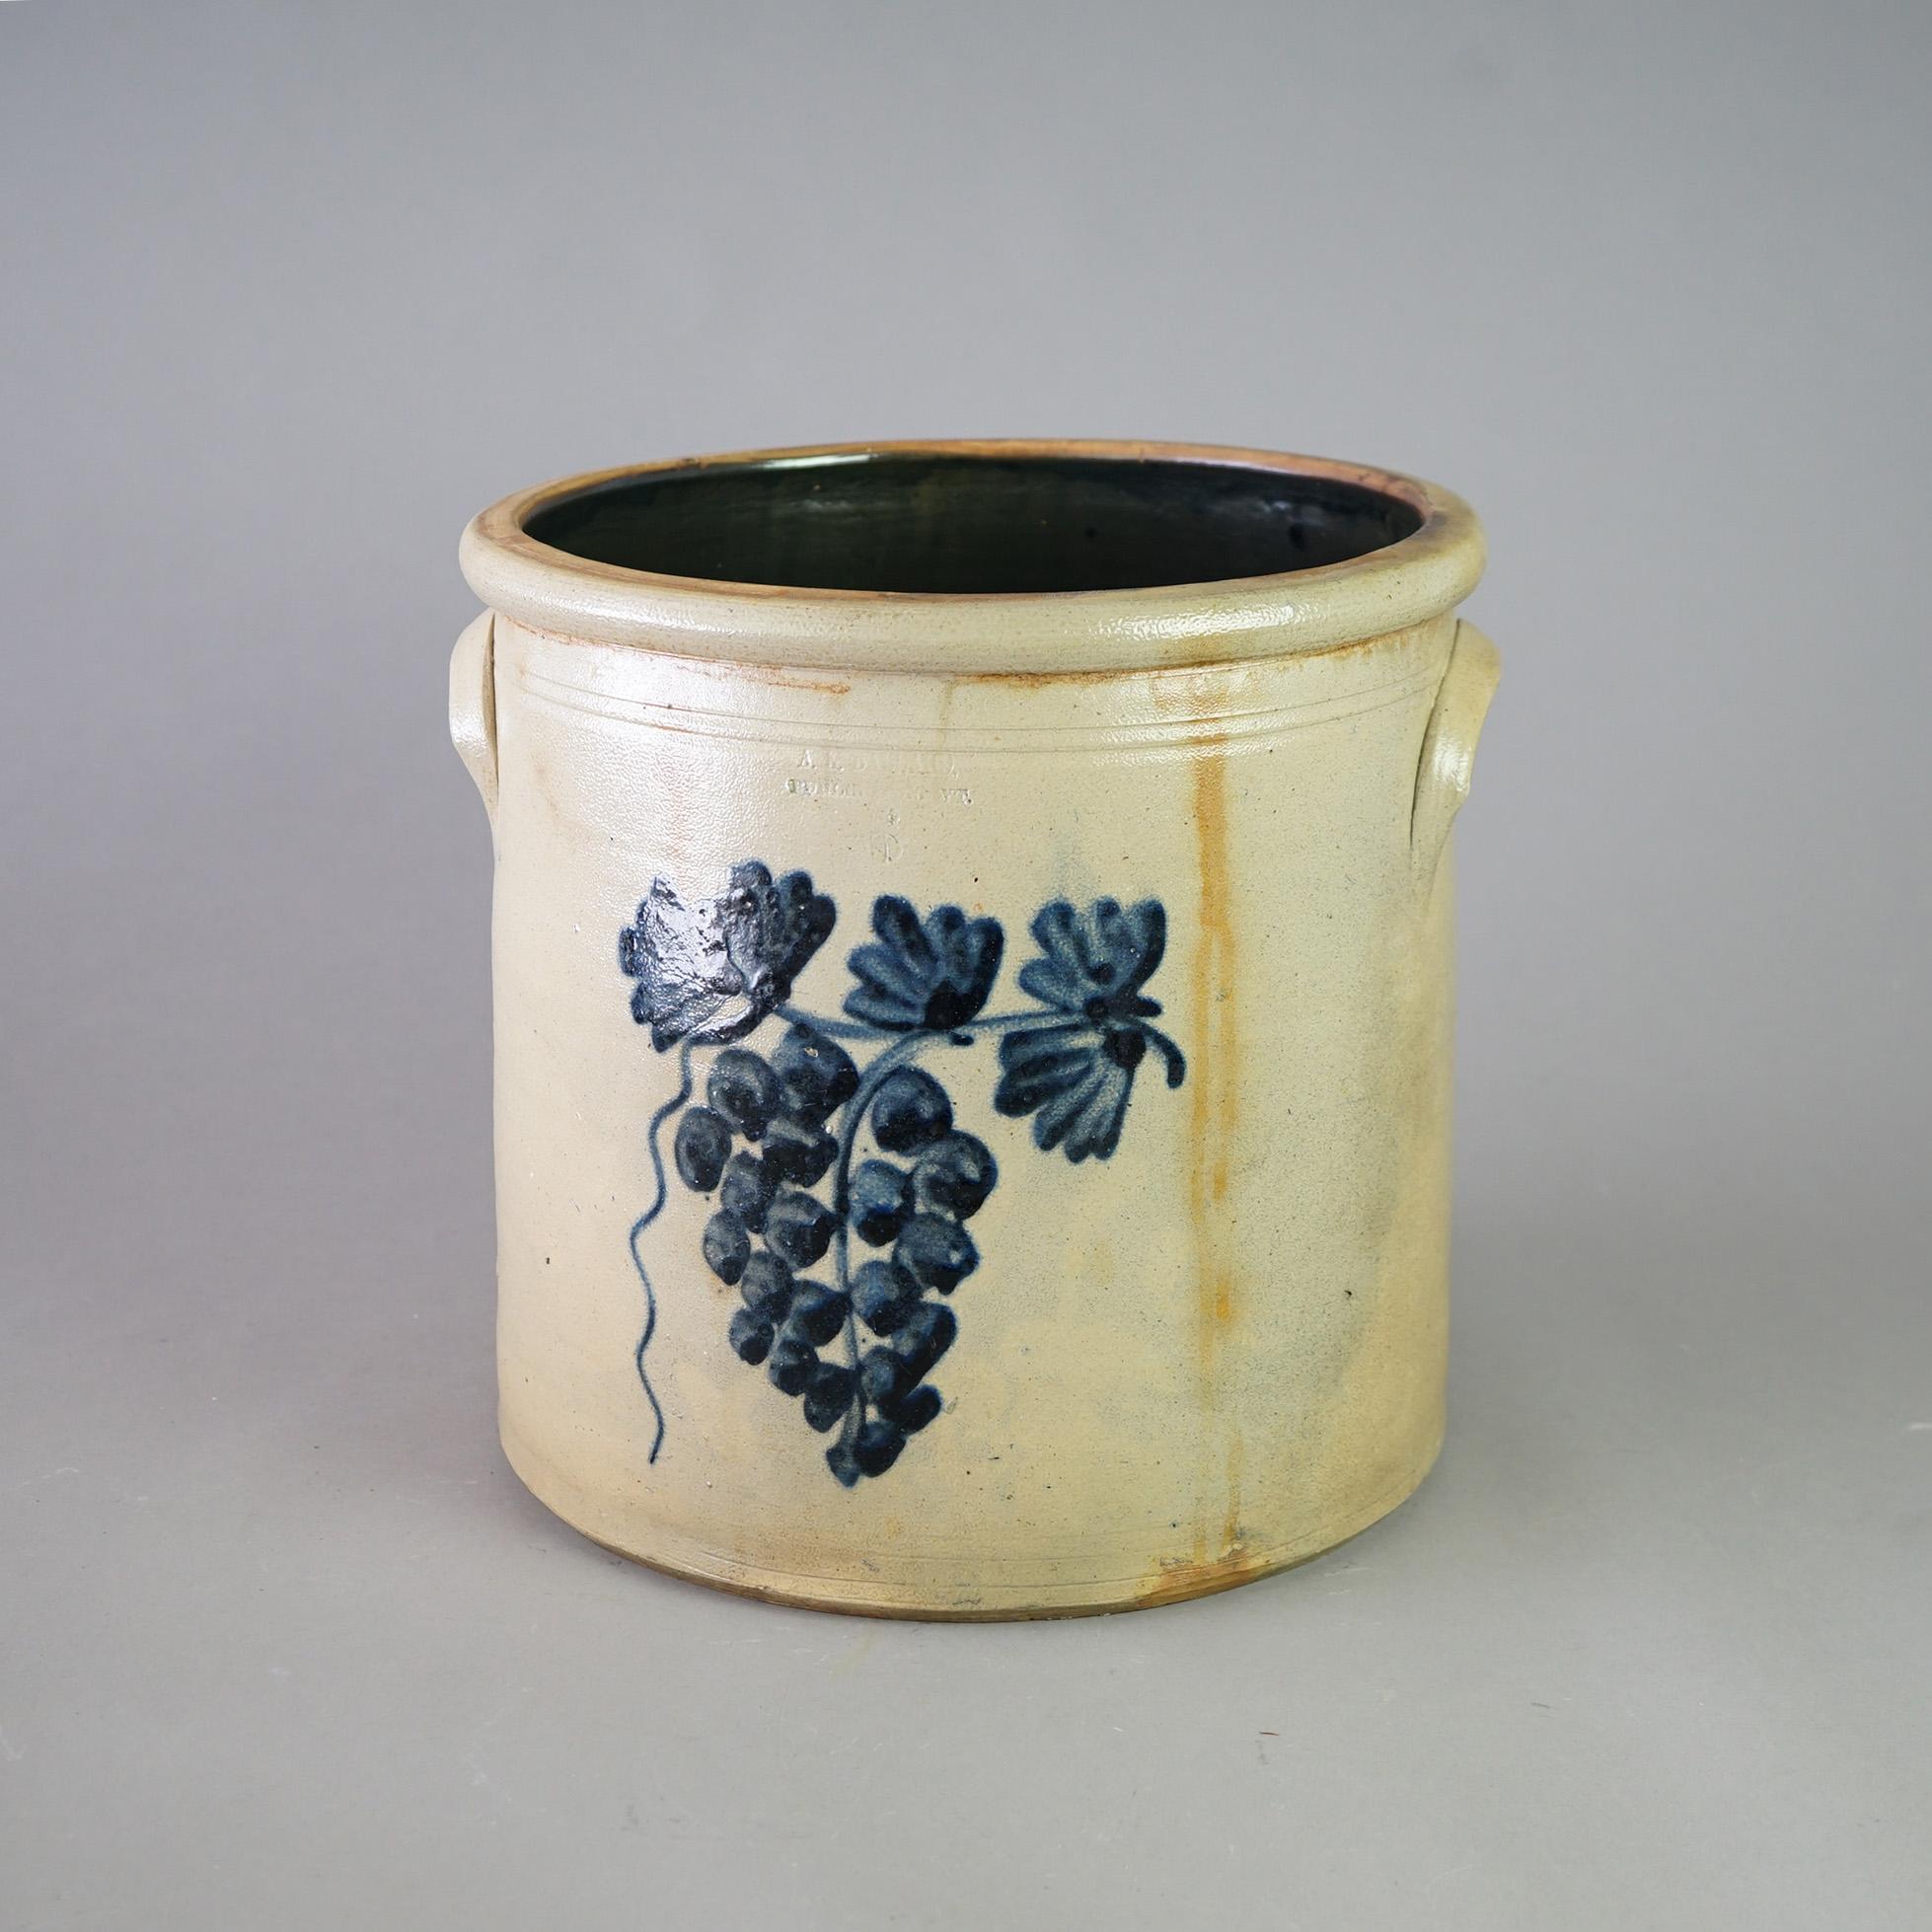 An antique Burlington crock offers salt glazed stoneware construction with double handles and blue decorated with wine grapes and leaf, maker stamped, c1870

Measures - 13.5